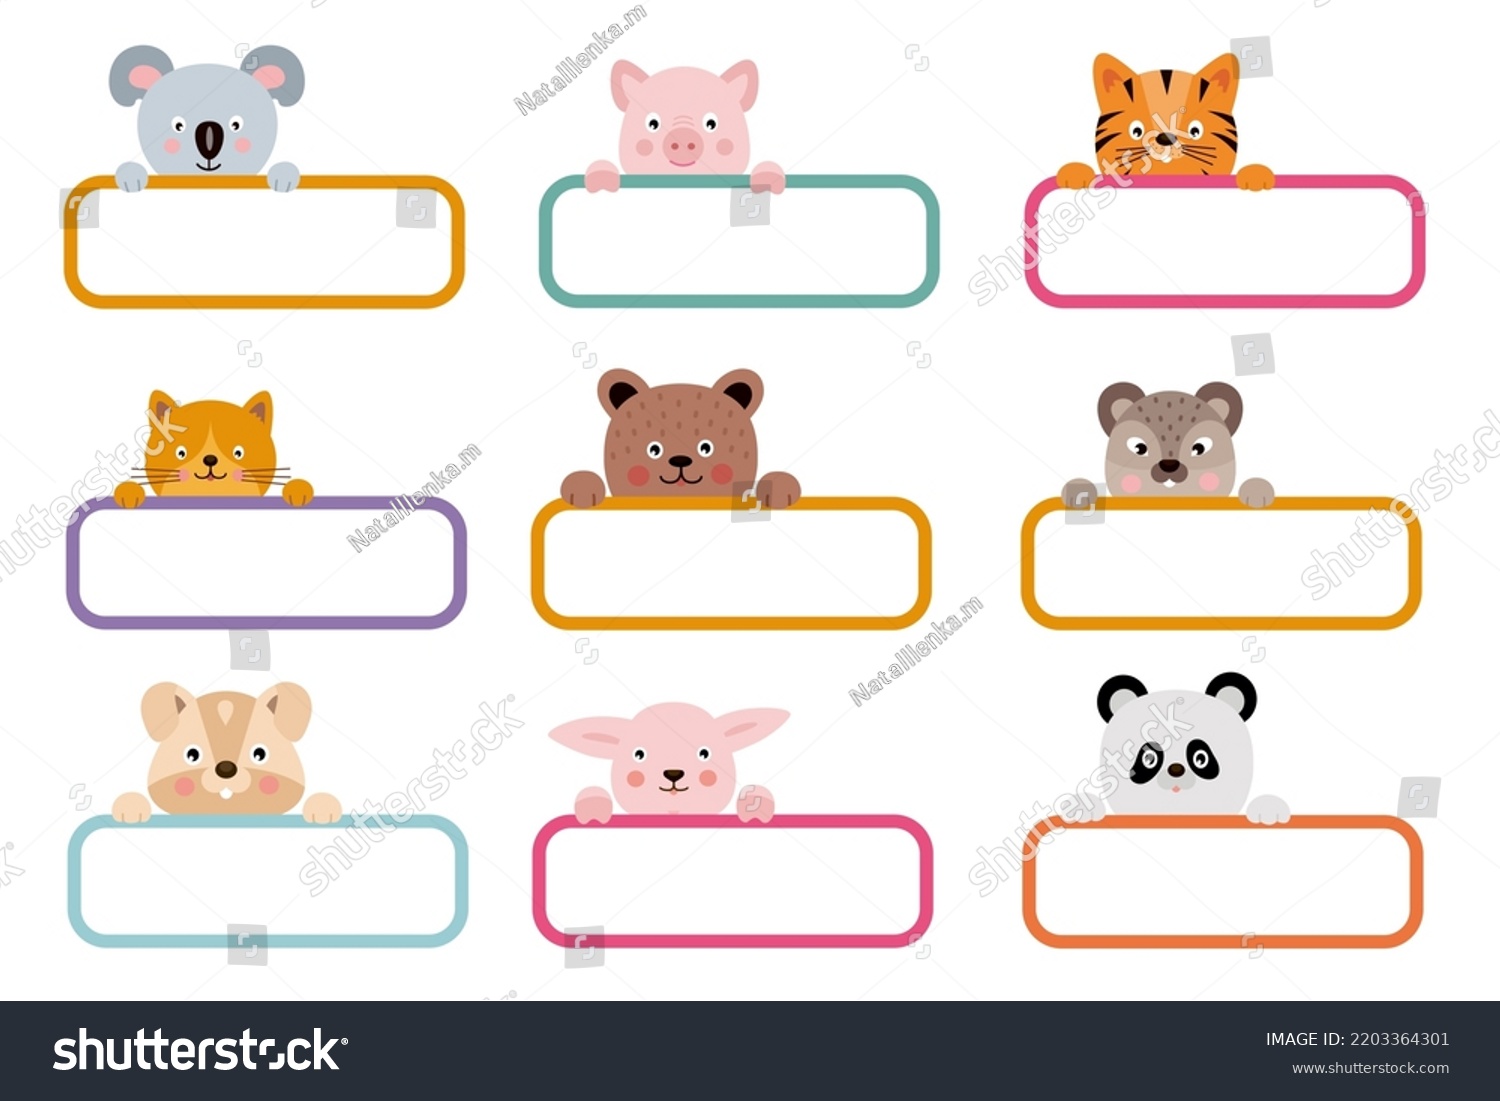 Cute Name Stickers School Label Frames Stock Vector (Royalty Free ...